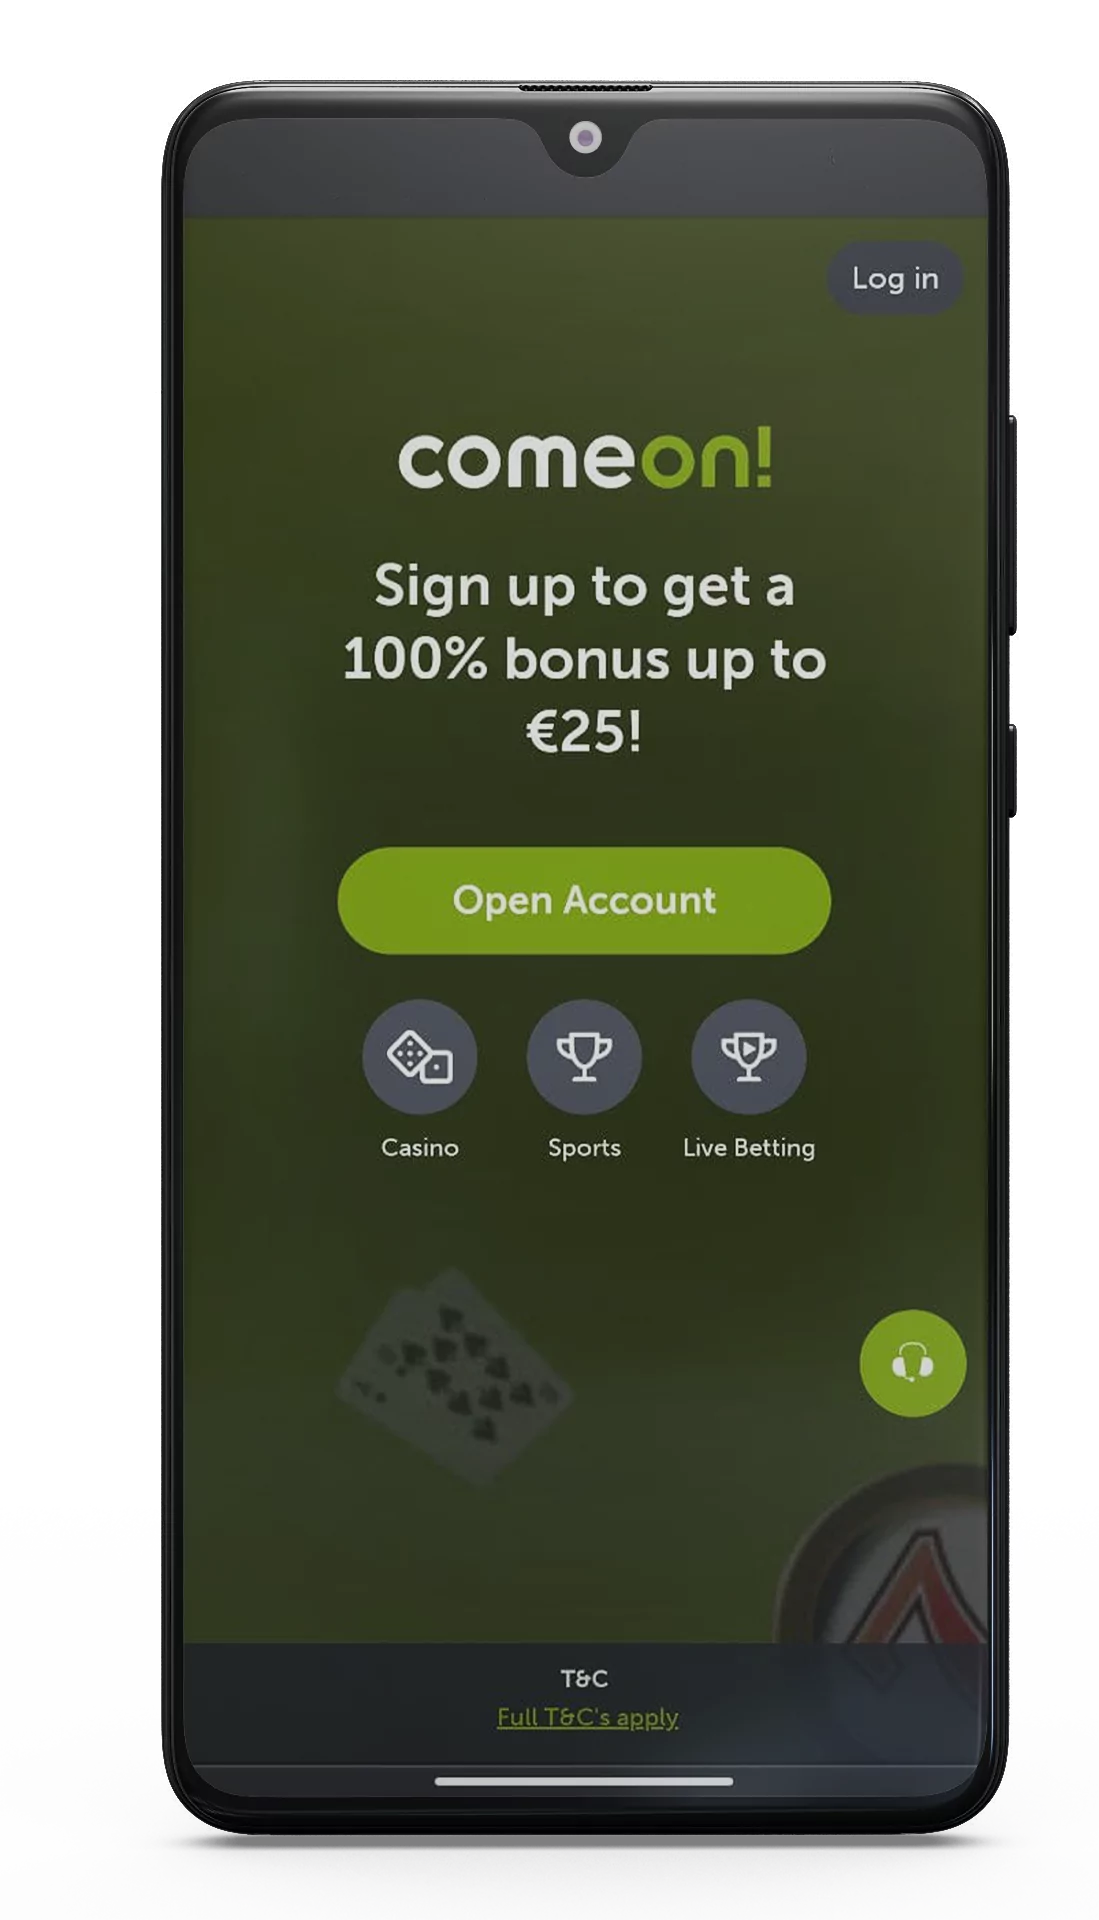 Visit the ComeOn official website via your mobile phone.